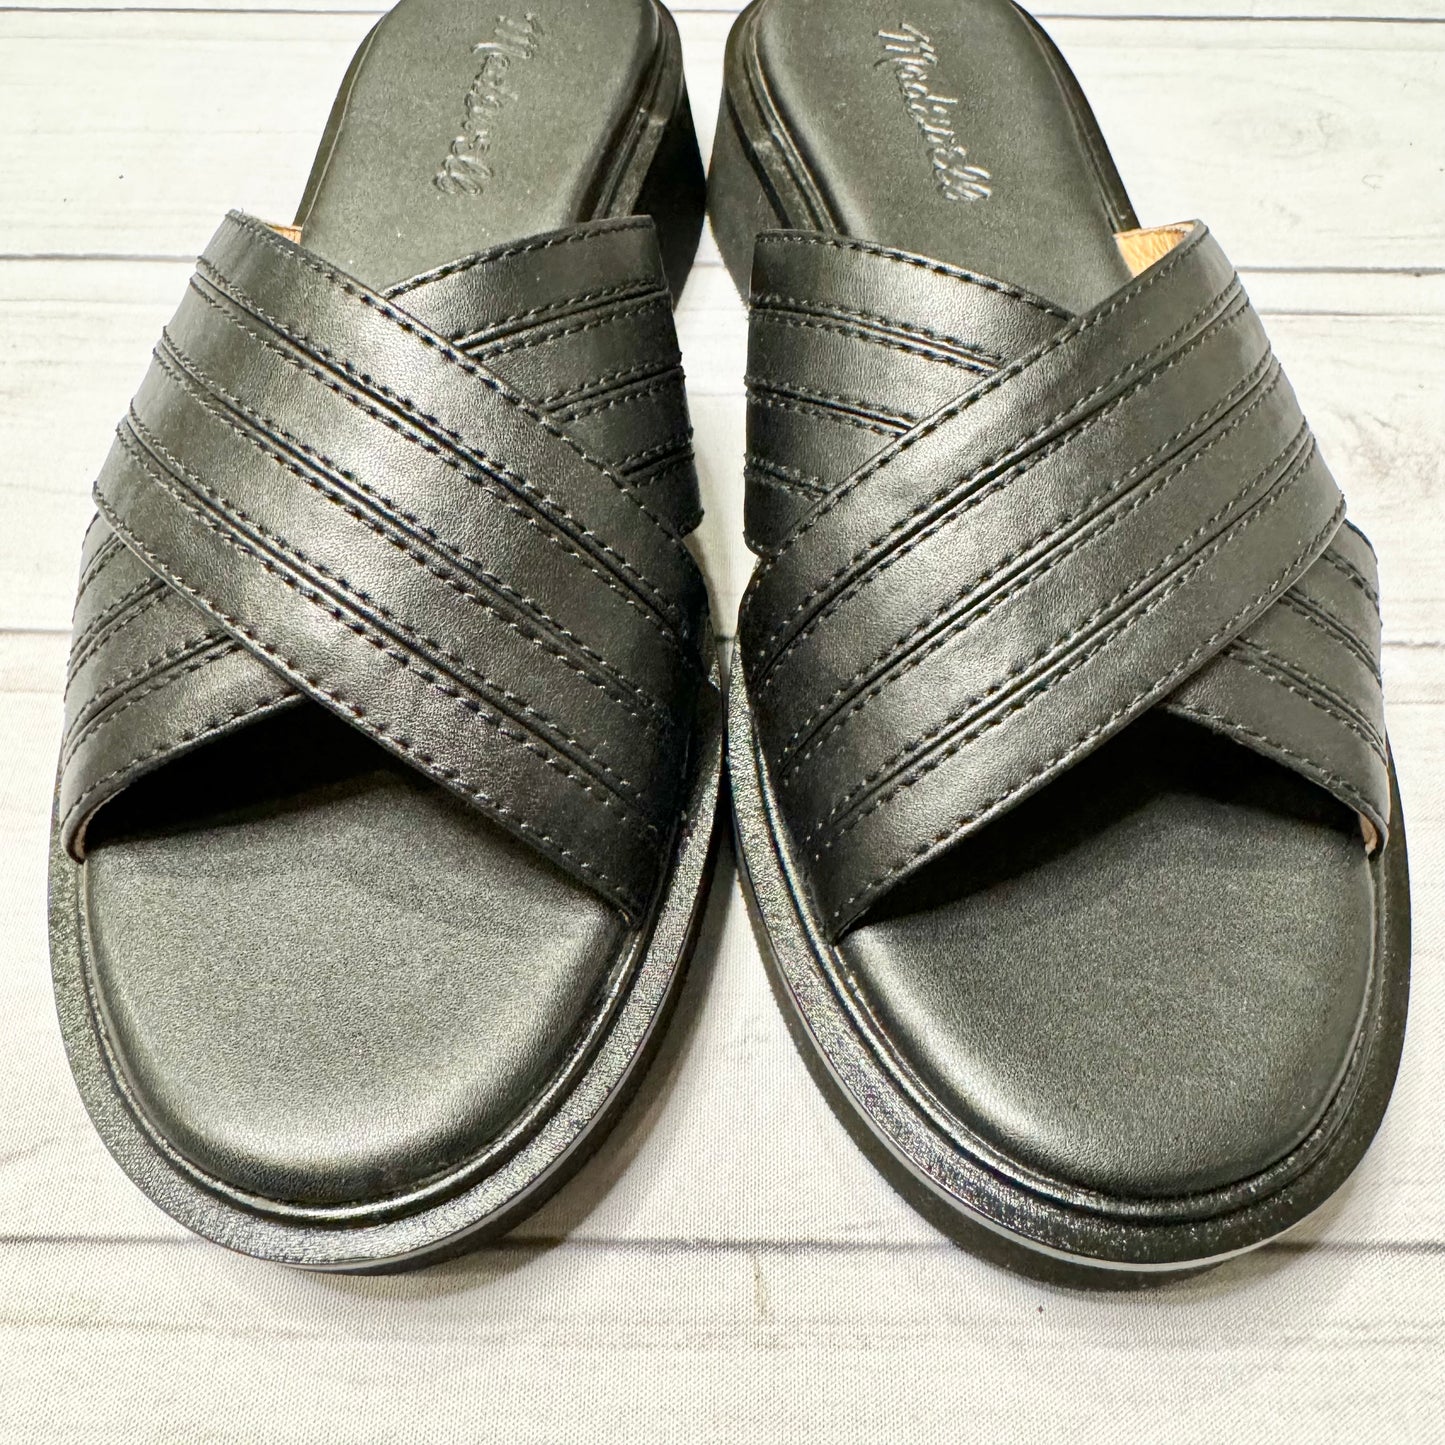 Sandals Flats By Madewell  Size: 6.5